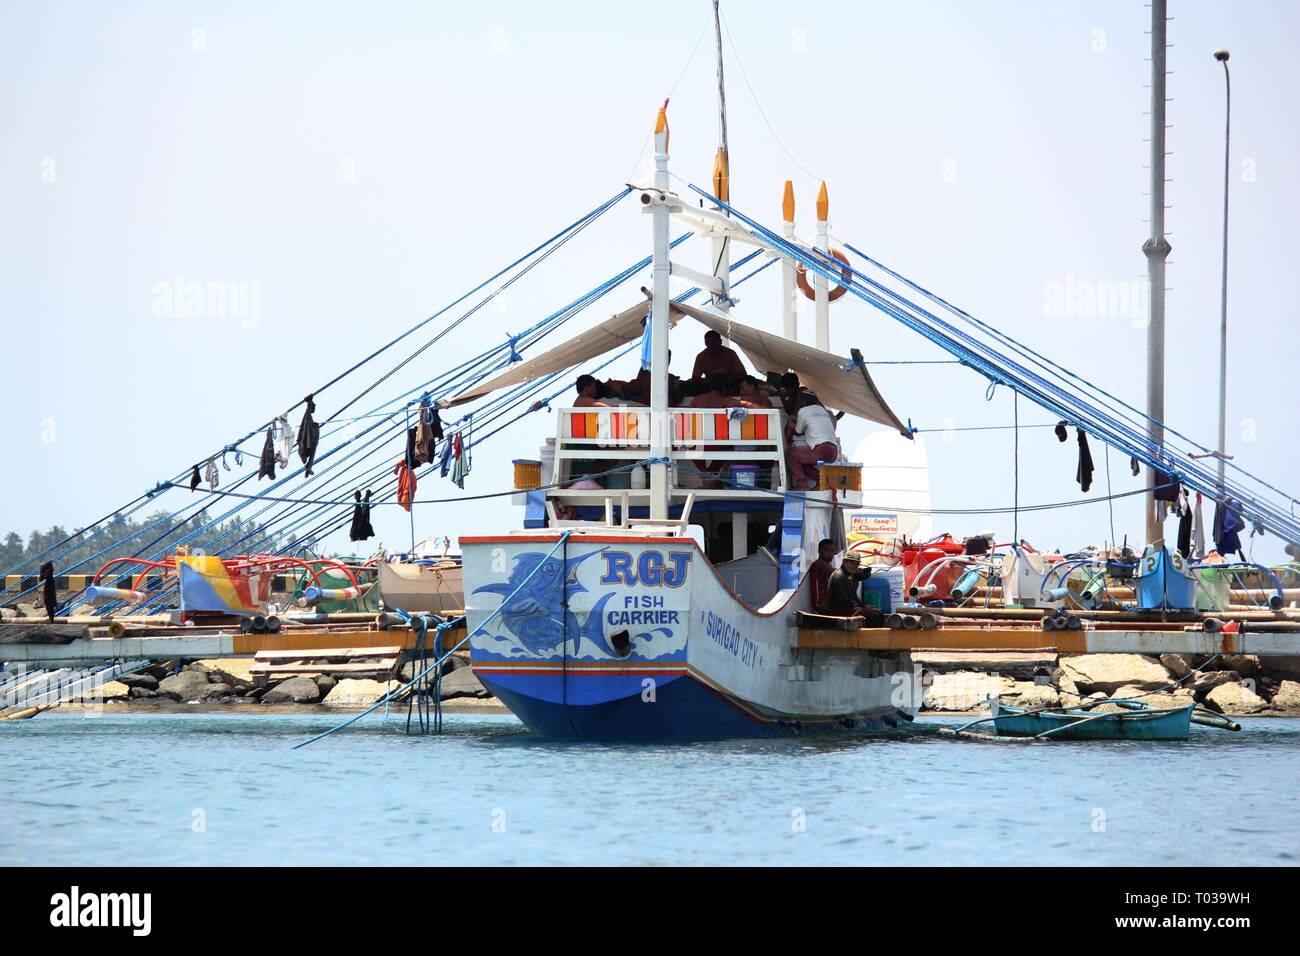 SURIGAO DEL SUR, PHILIPPINES—AUGUST 2014: A fishing boat with fishermen resting docked at Cantilan in Surigao del Sur, southern Philippines. Stock Photo